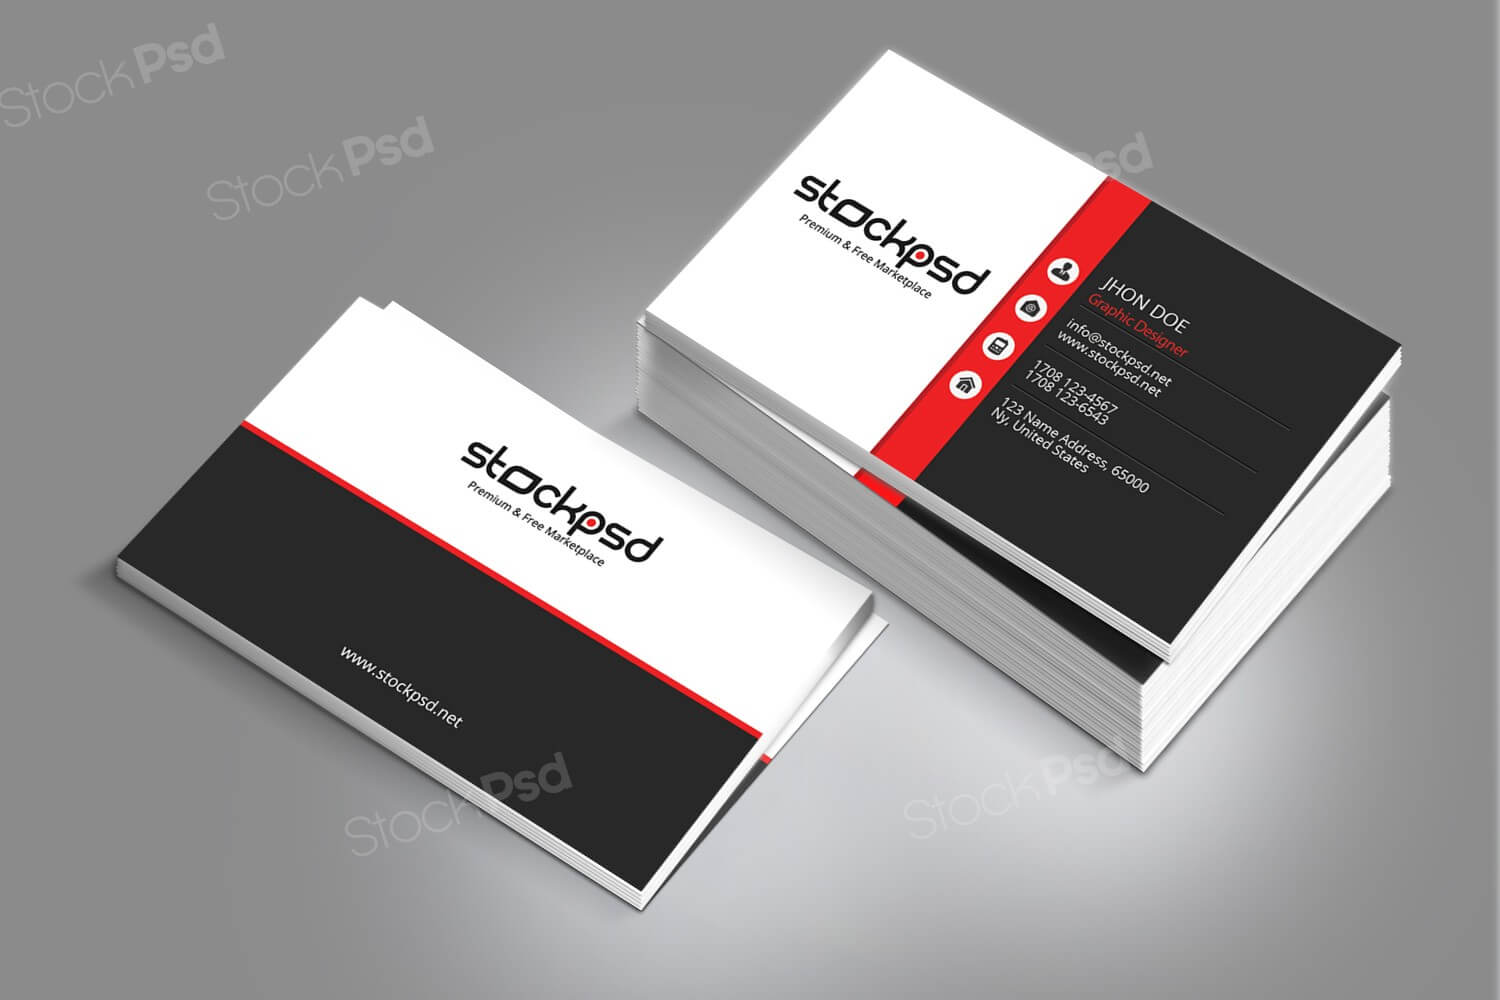 63Dbe4 Photoshop Template Business Card | Wiring Resources 2019 Intended For Free Personal Business Card Templates